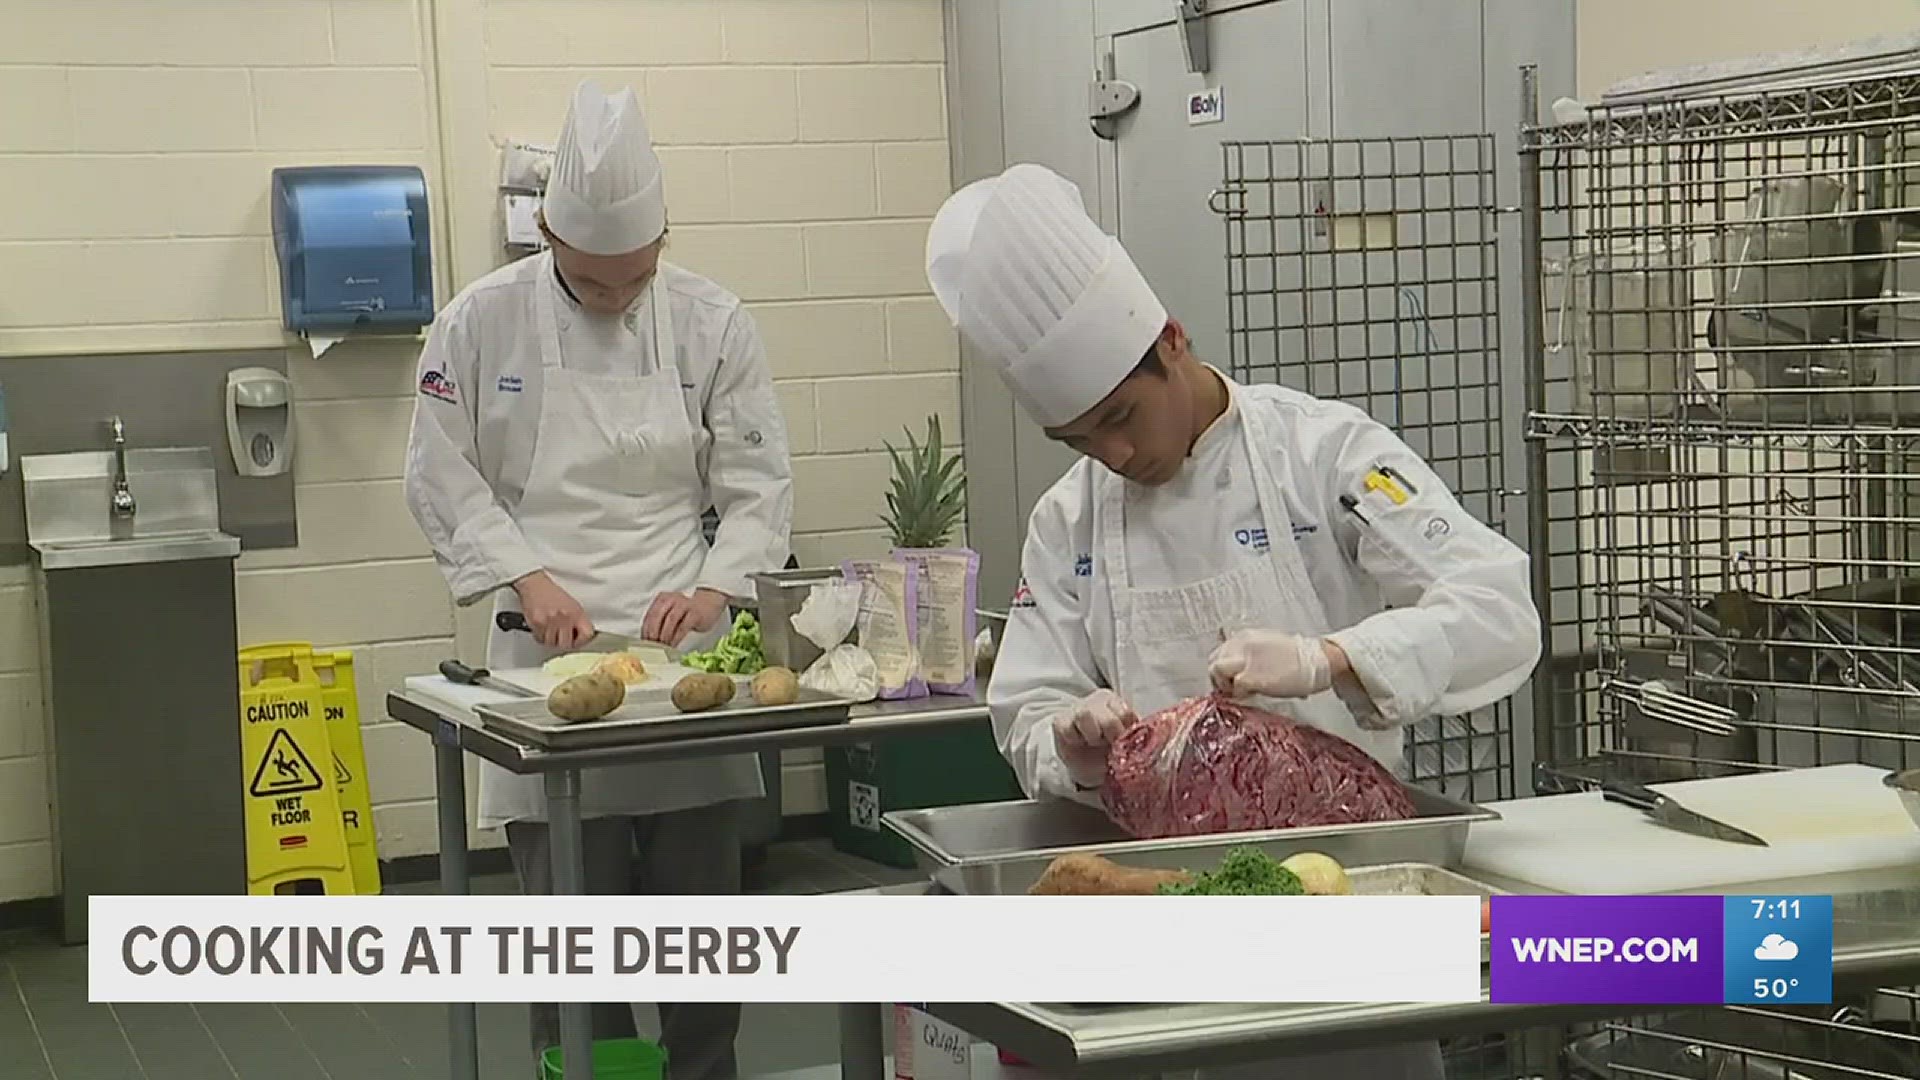 Student chefs at Penn College will get the chance to cook for thousands at the 149th running of the Kentucky Derby.